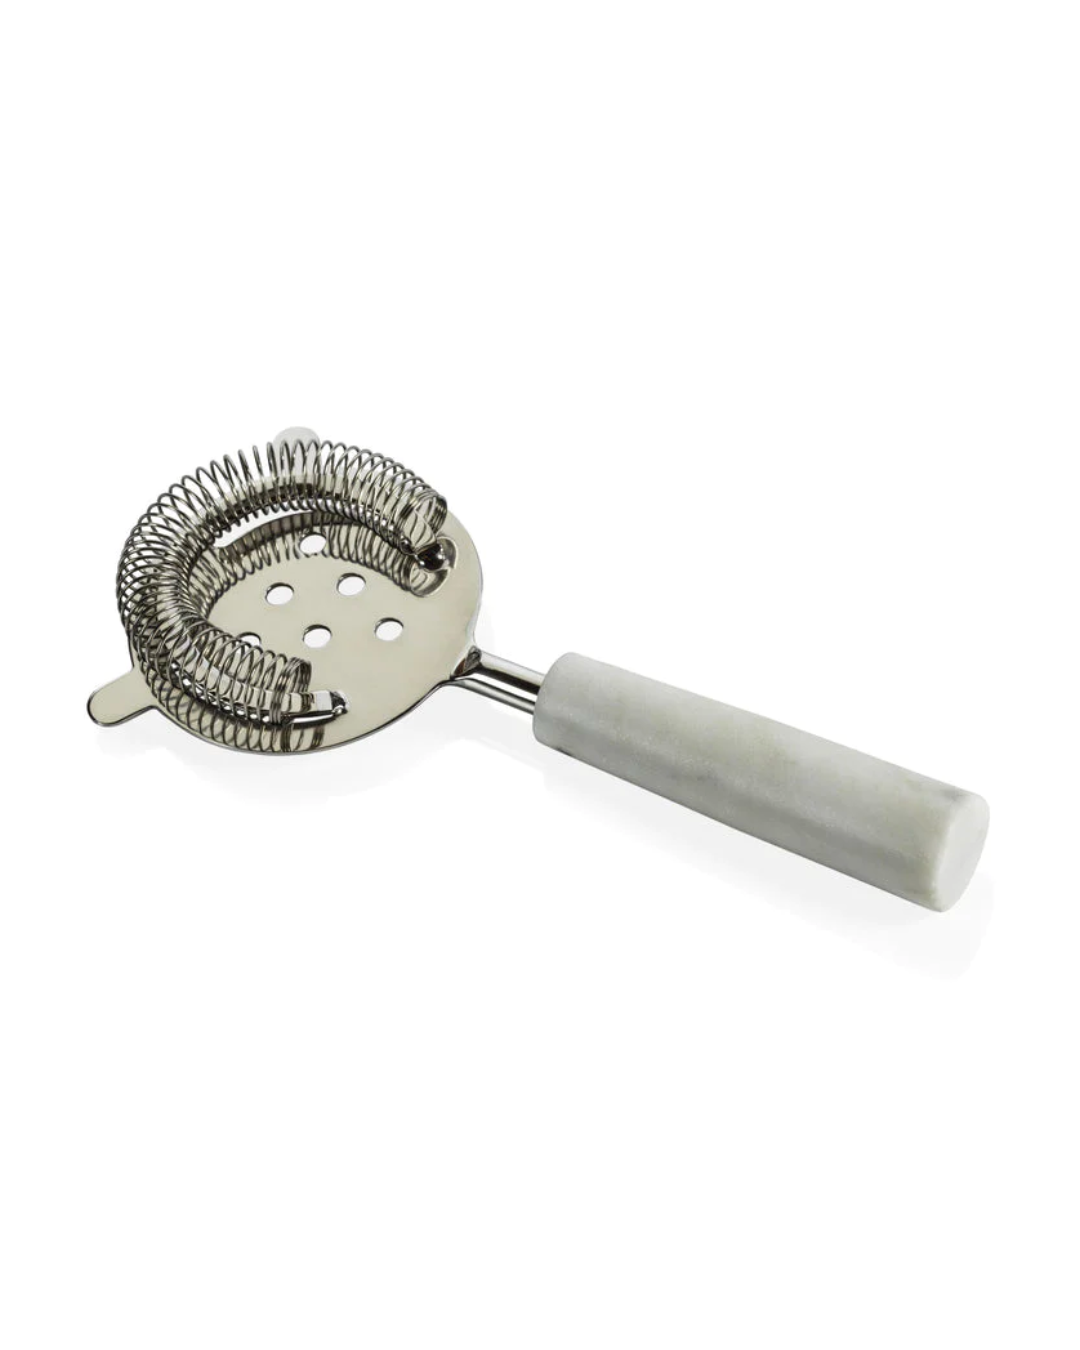 This Zodax Marble Cocktail Strainer, with a coiled spring edge and several holes for filtering, adds an upscale flair to your home bar accessory collection. The prong on one side allows it to rest neatly on a shaker or glass, while the cylindrical marble handle provides a sturdy grip.